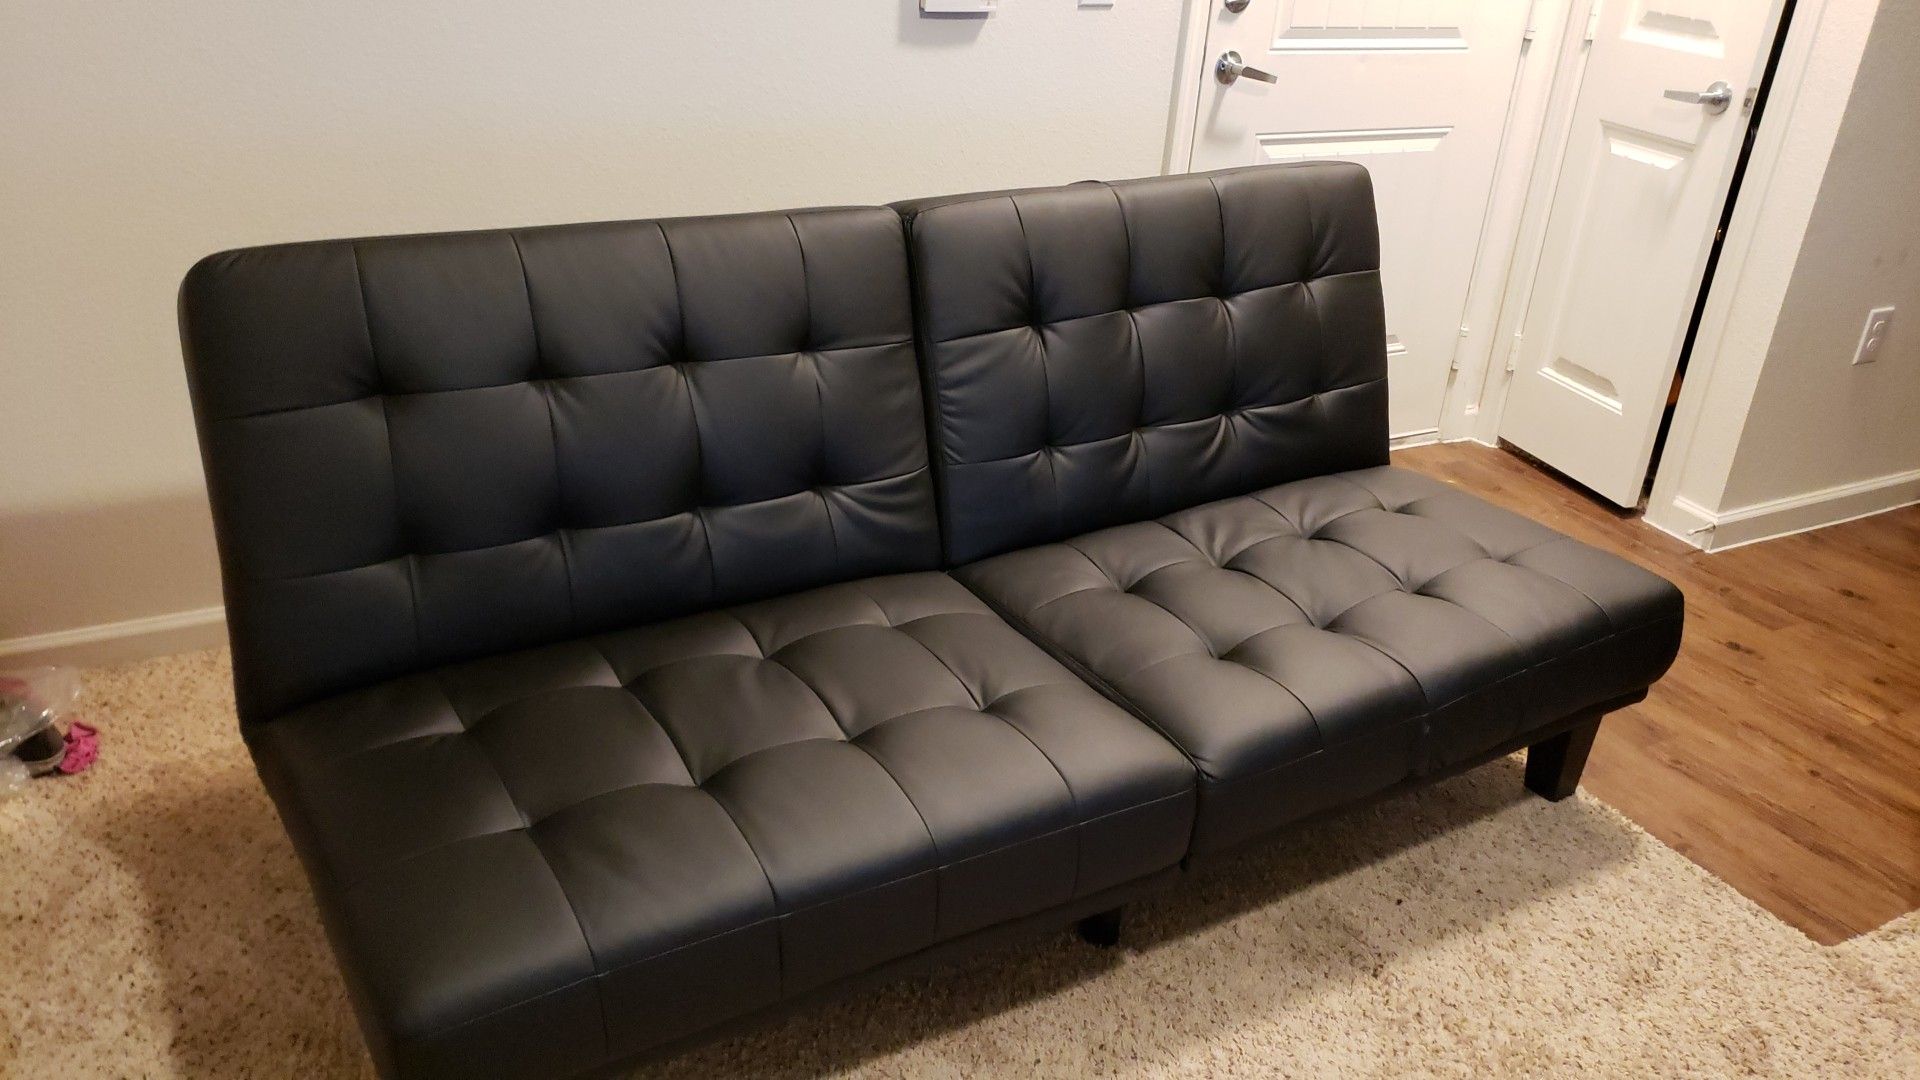 Couch chaise lounger futon sofa